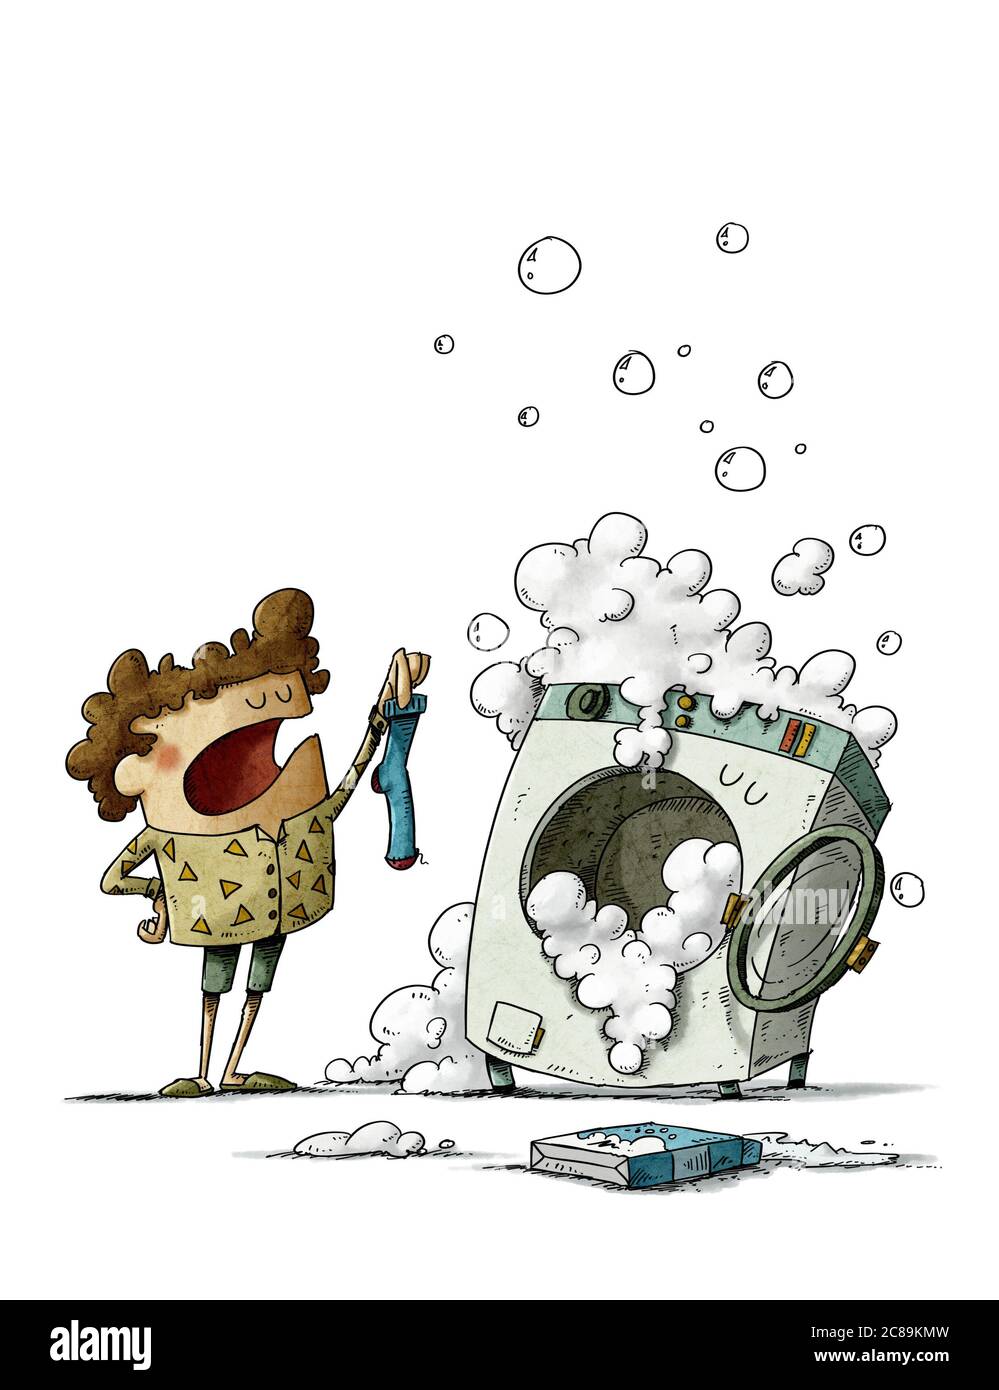 Washer that loses socks. illustration of a boy showing a sock to a funny washing machine that has swallowed the other one. isolated Stock Photo